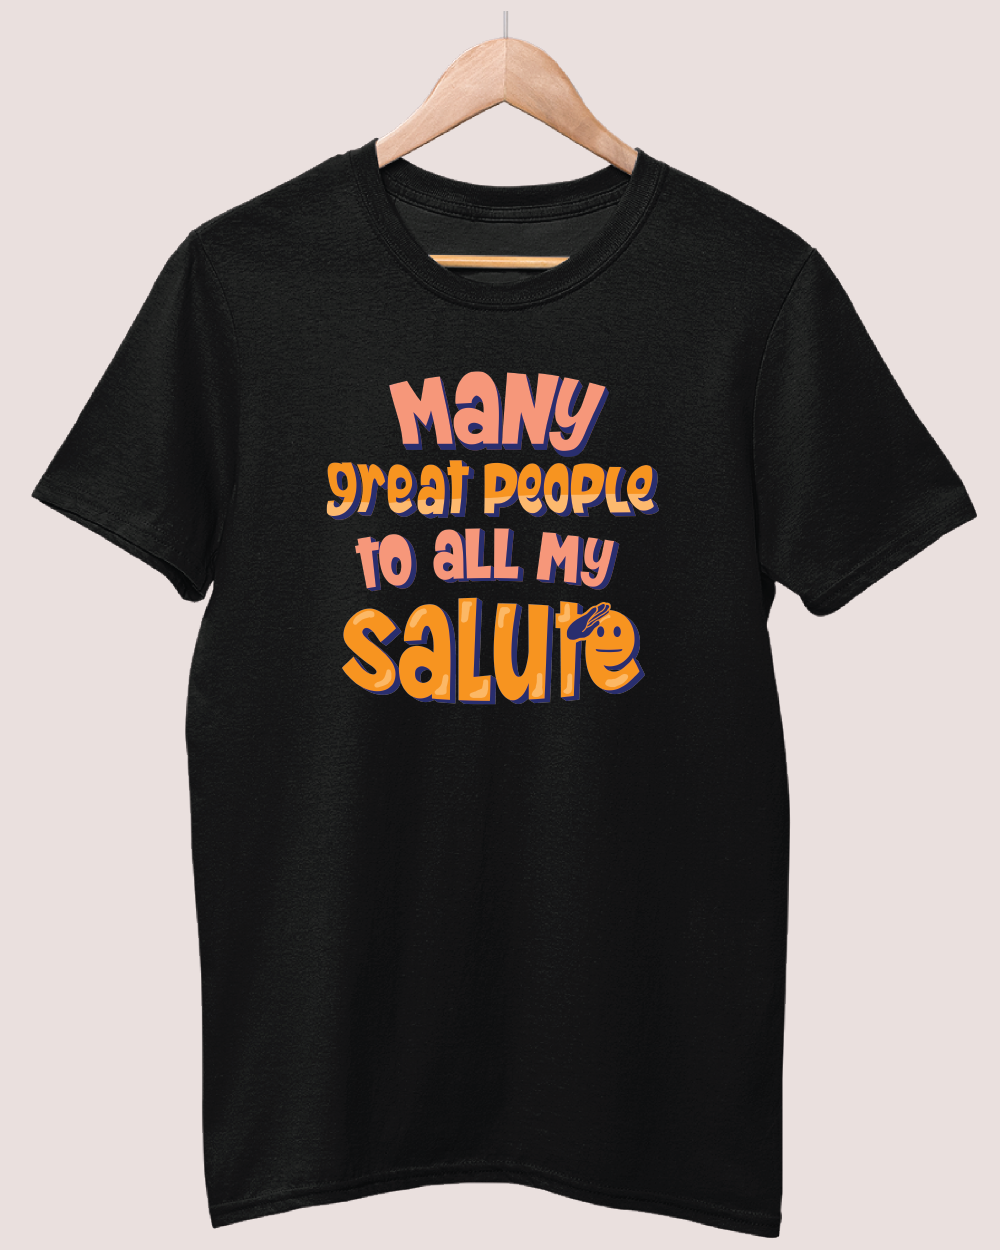 Many great people to all my salute T-shirt